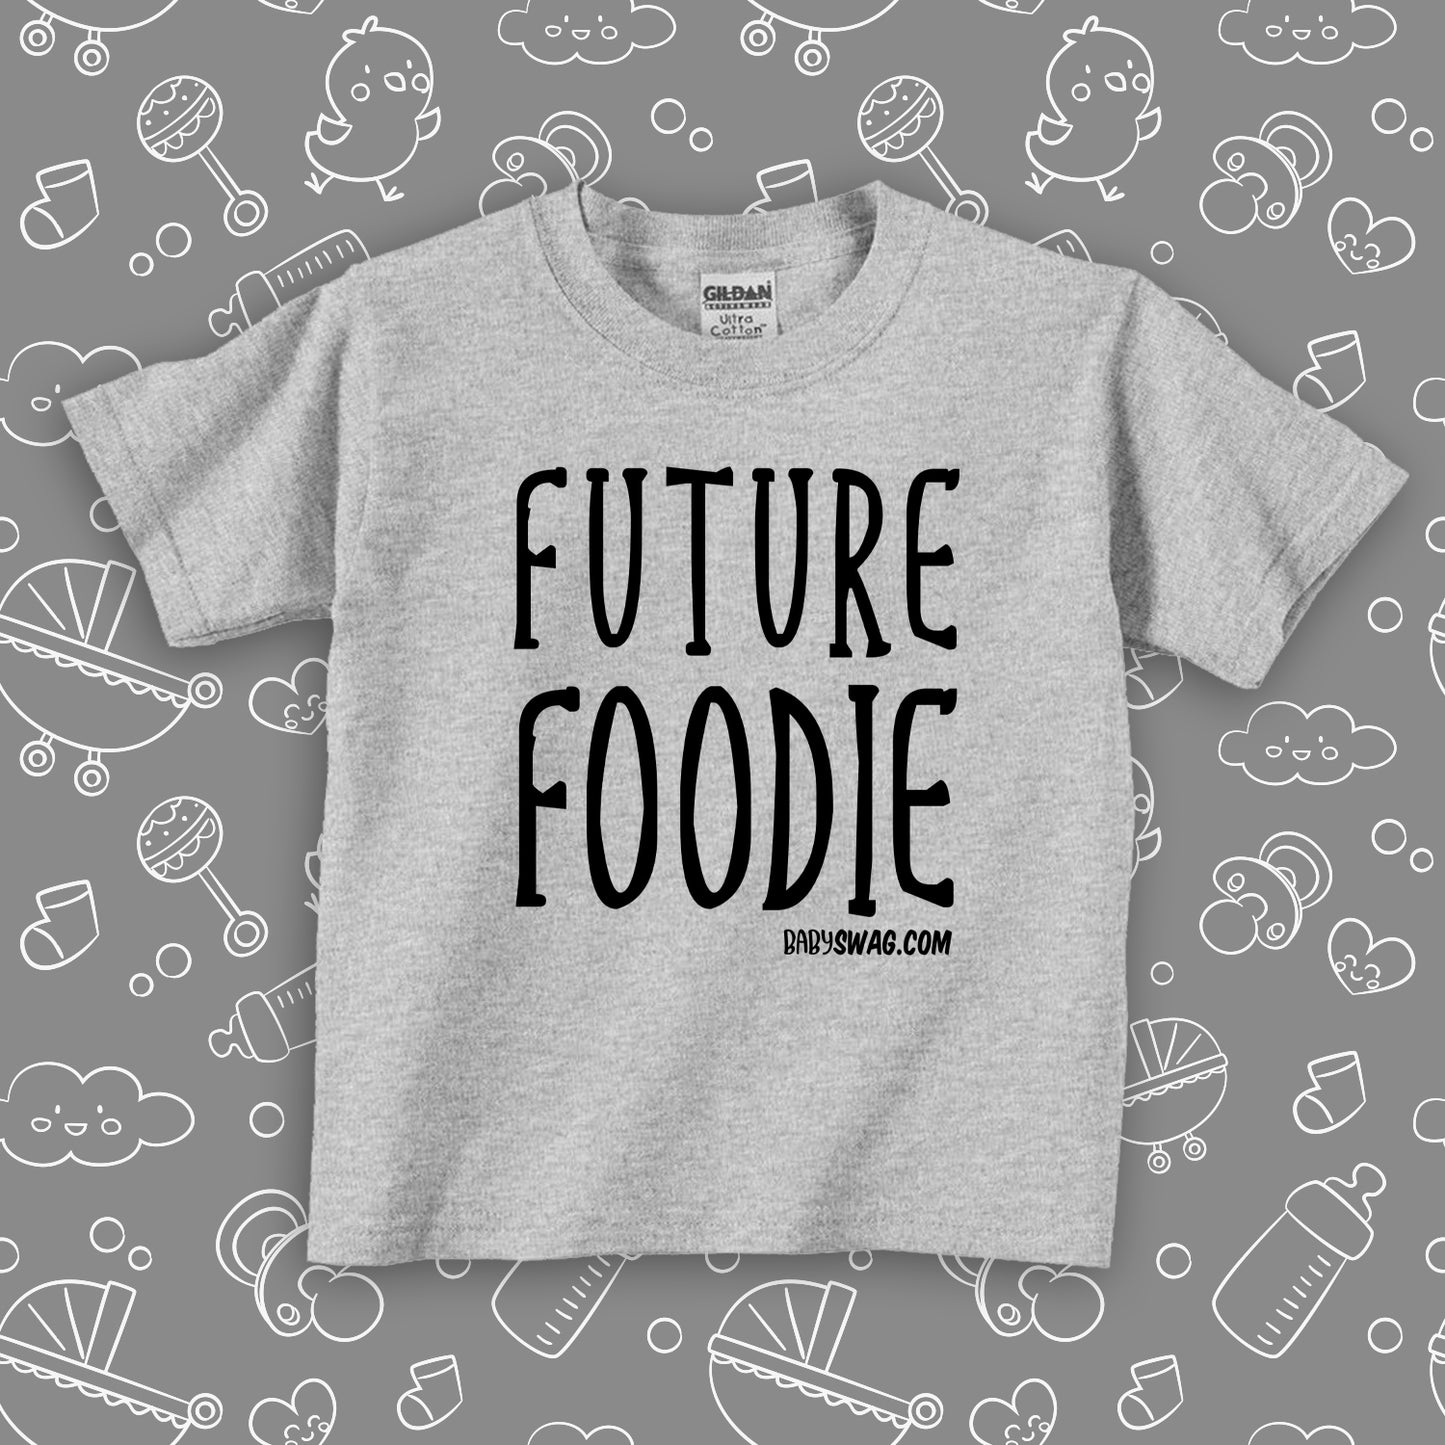 The ''Future Foodie'' cute toddler shirts in grey.